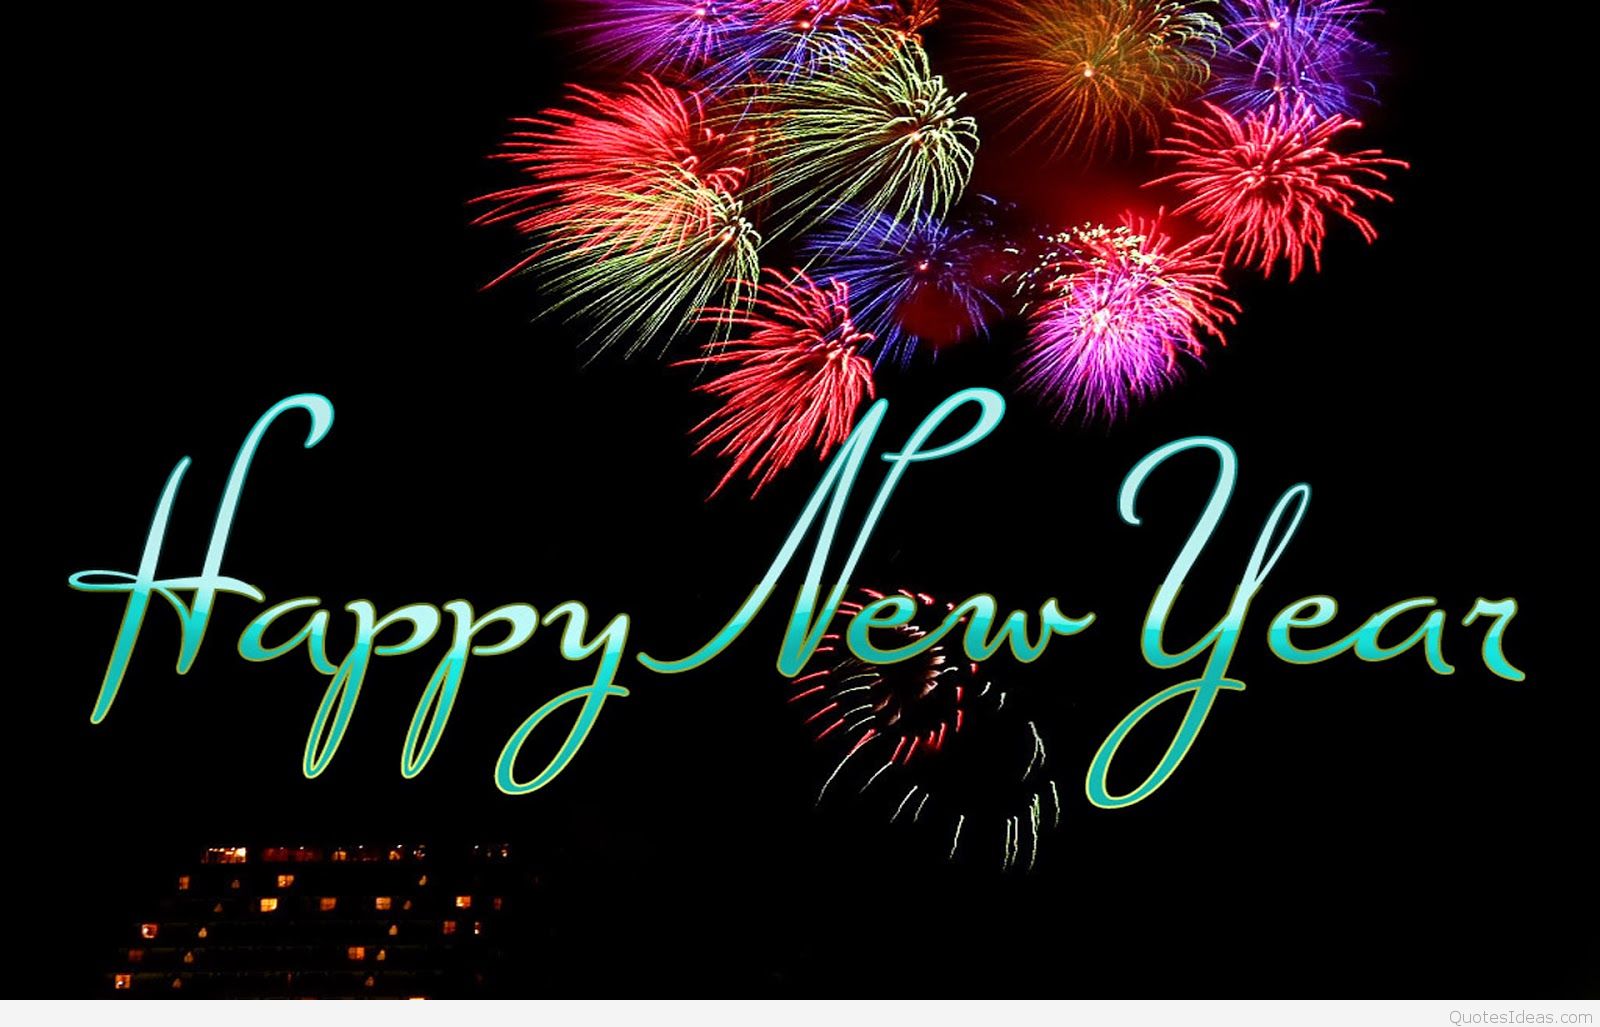 Top Quotes For Happy New Year With Image Wallpaper